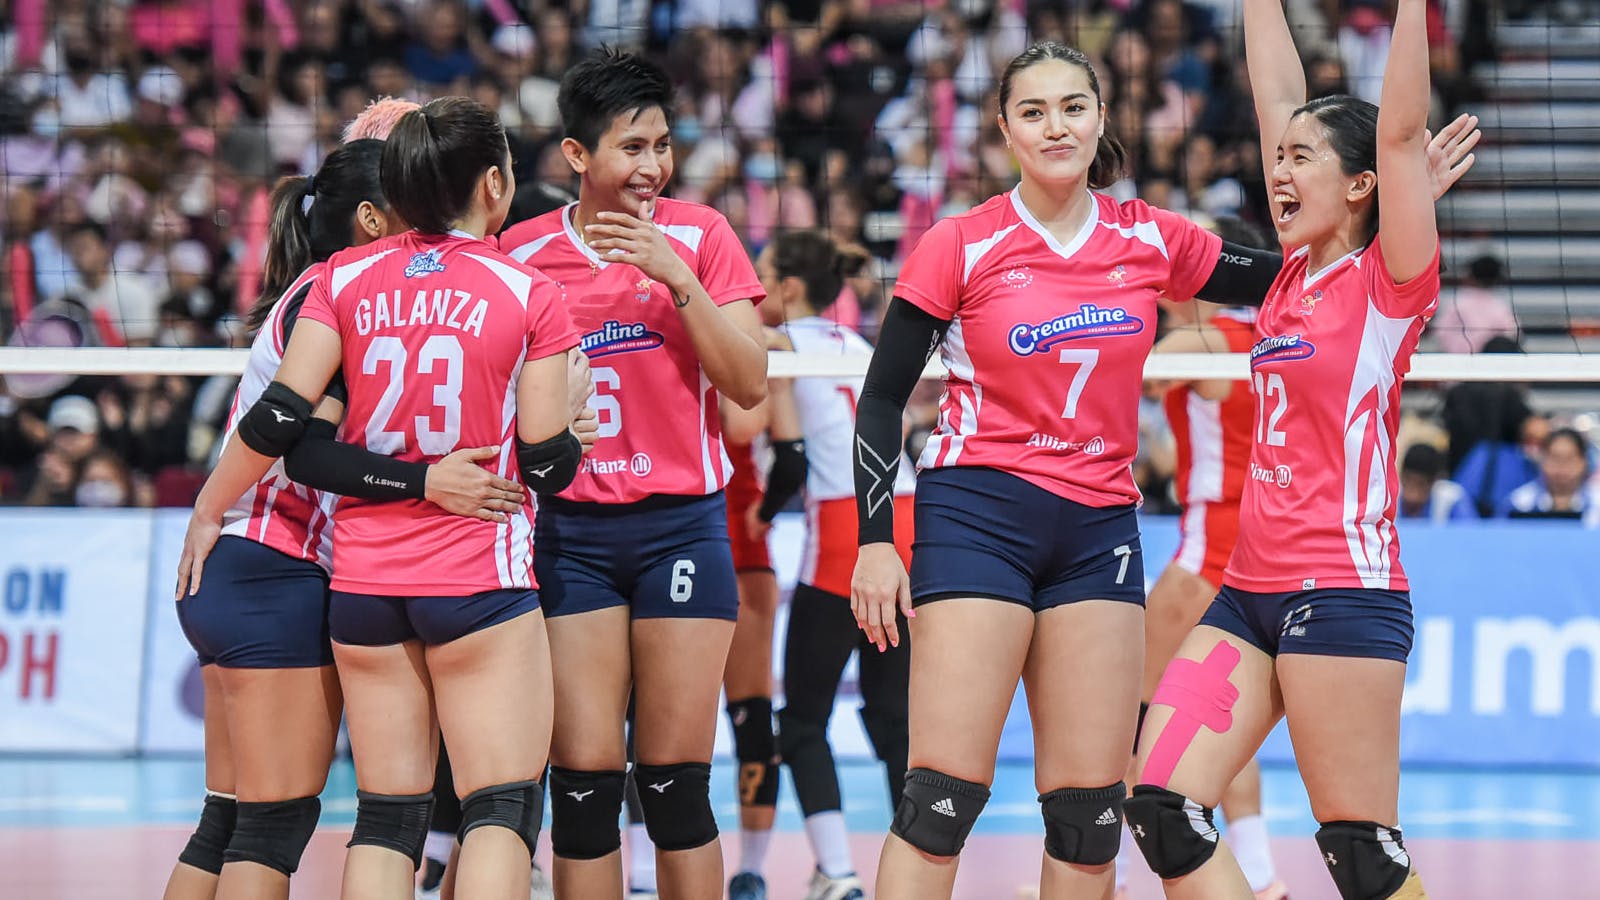 Champs again Creamline may be the ‘Happy Lang’ team, but it is hyper competitive to the core